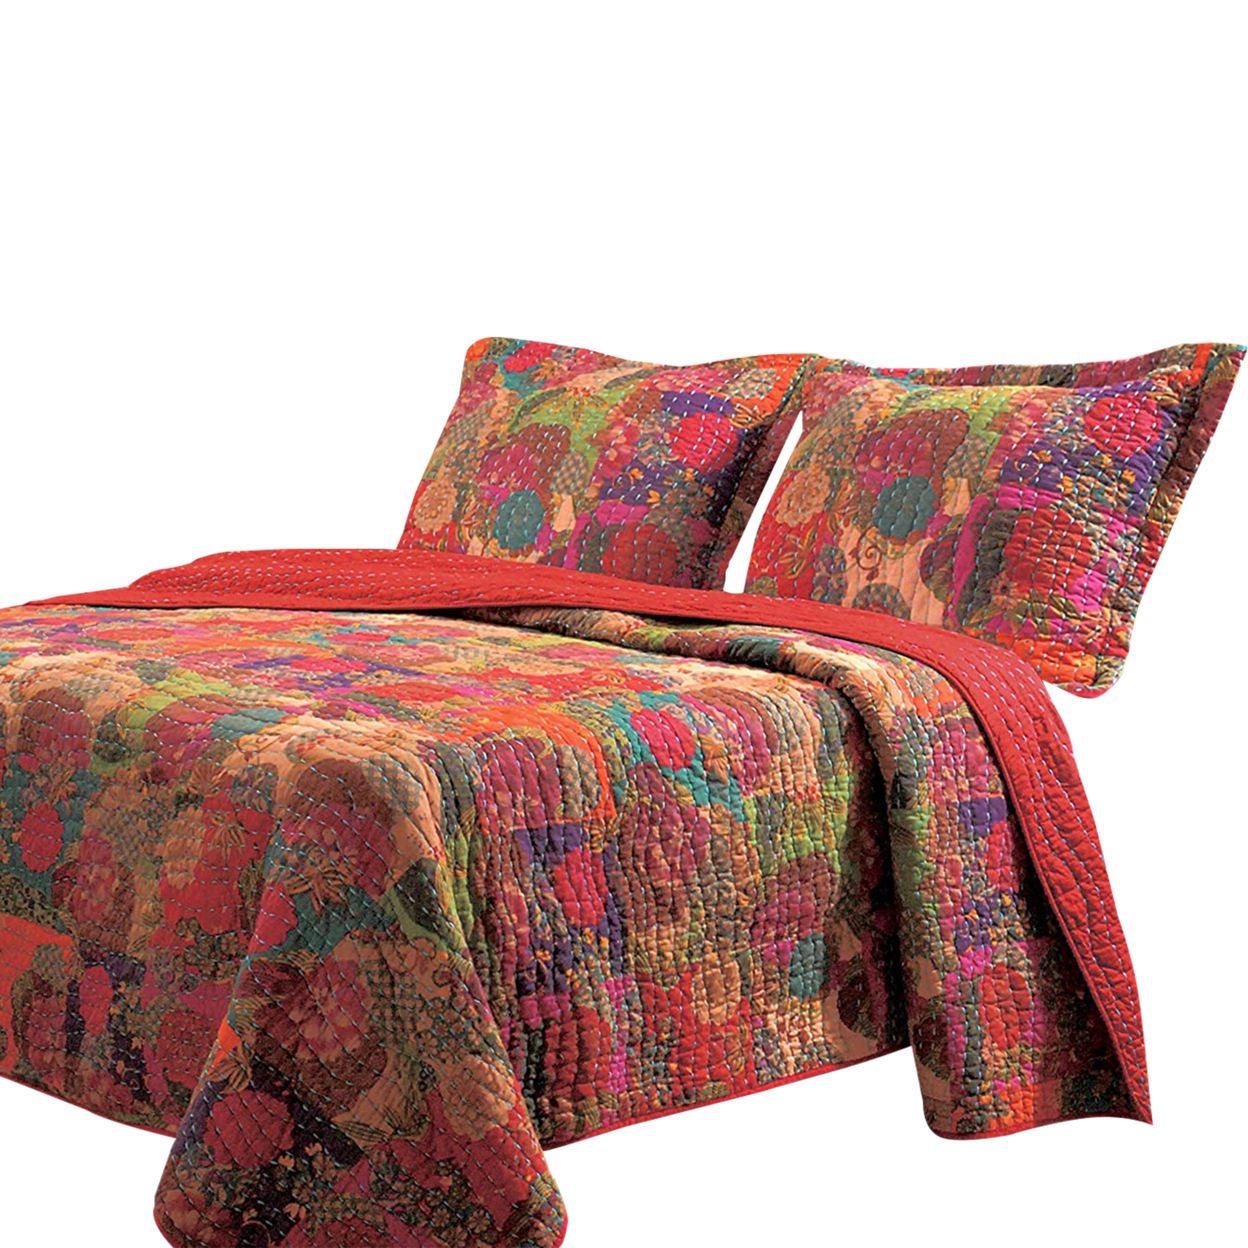 Tisa 3 Piece Reversible King Quilt Set With Floral And Fruit Pattern, Multicolor- Saltoro Sherpi